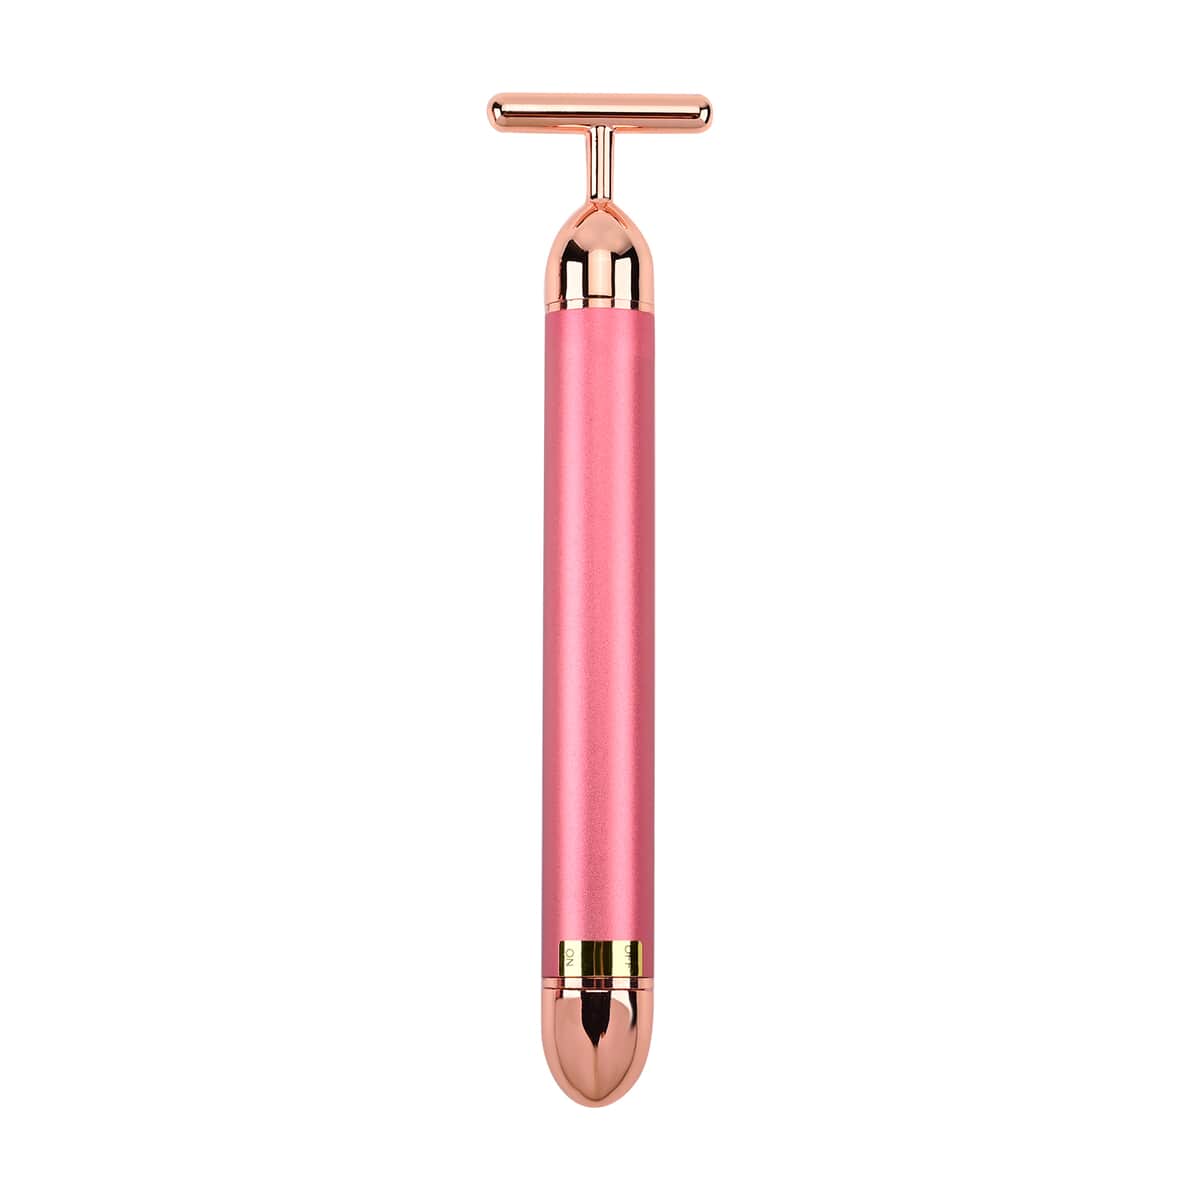 4-in-1 Face Massager Rollers with Four Interchangeable Massage Heads - Rose Gold (5.9"x1.49"), 1xAA Battery Not Including image number 4